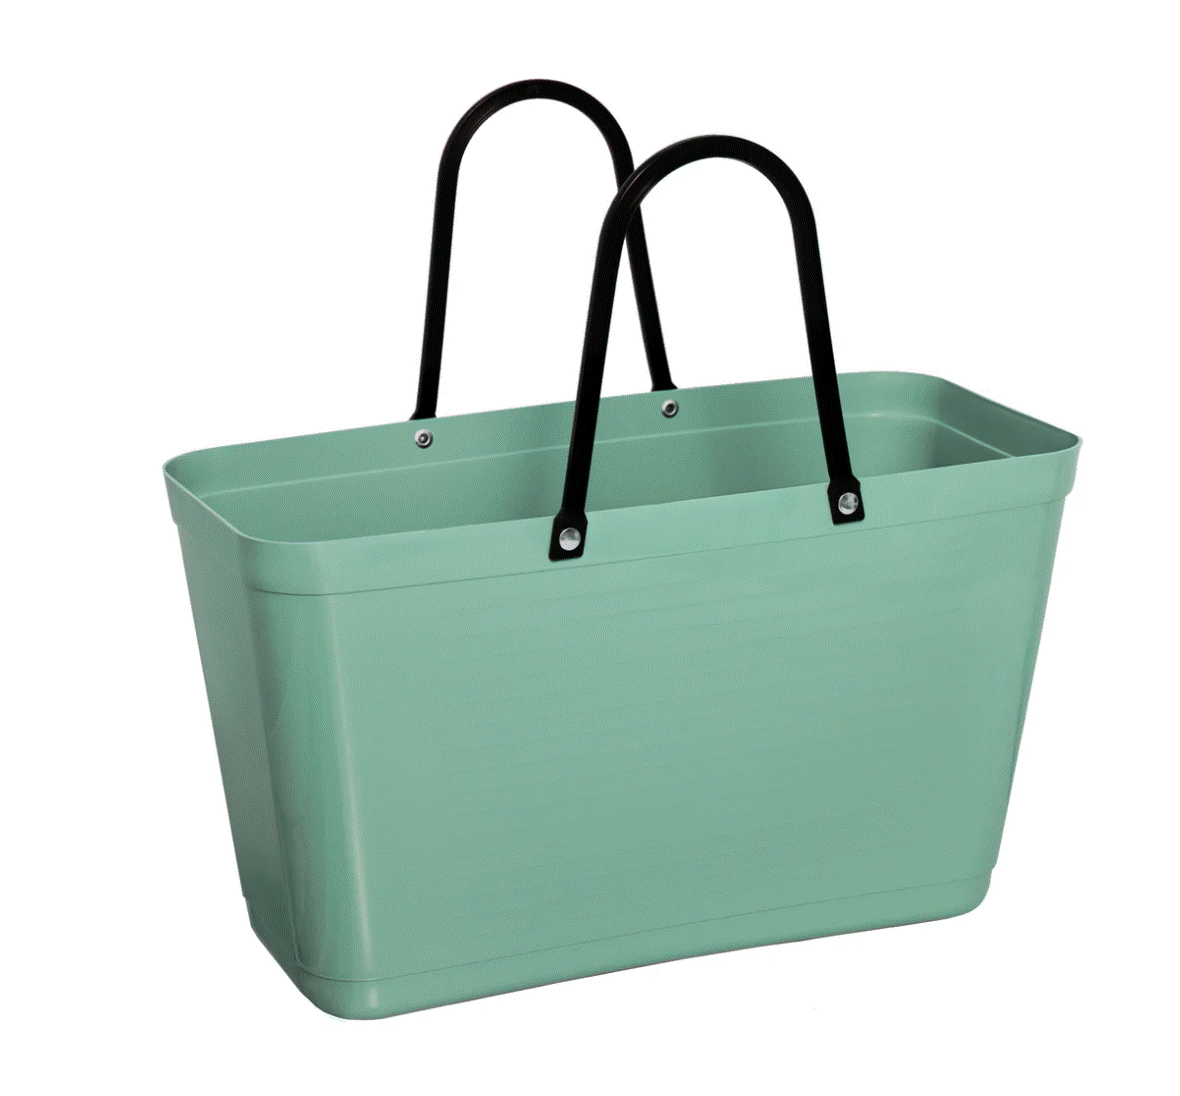 Hinza green plastic bags - Any Excuse